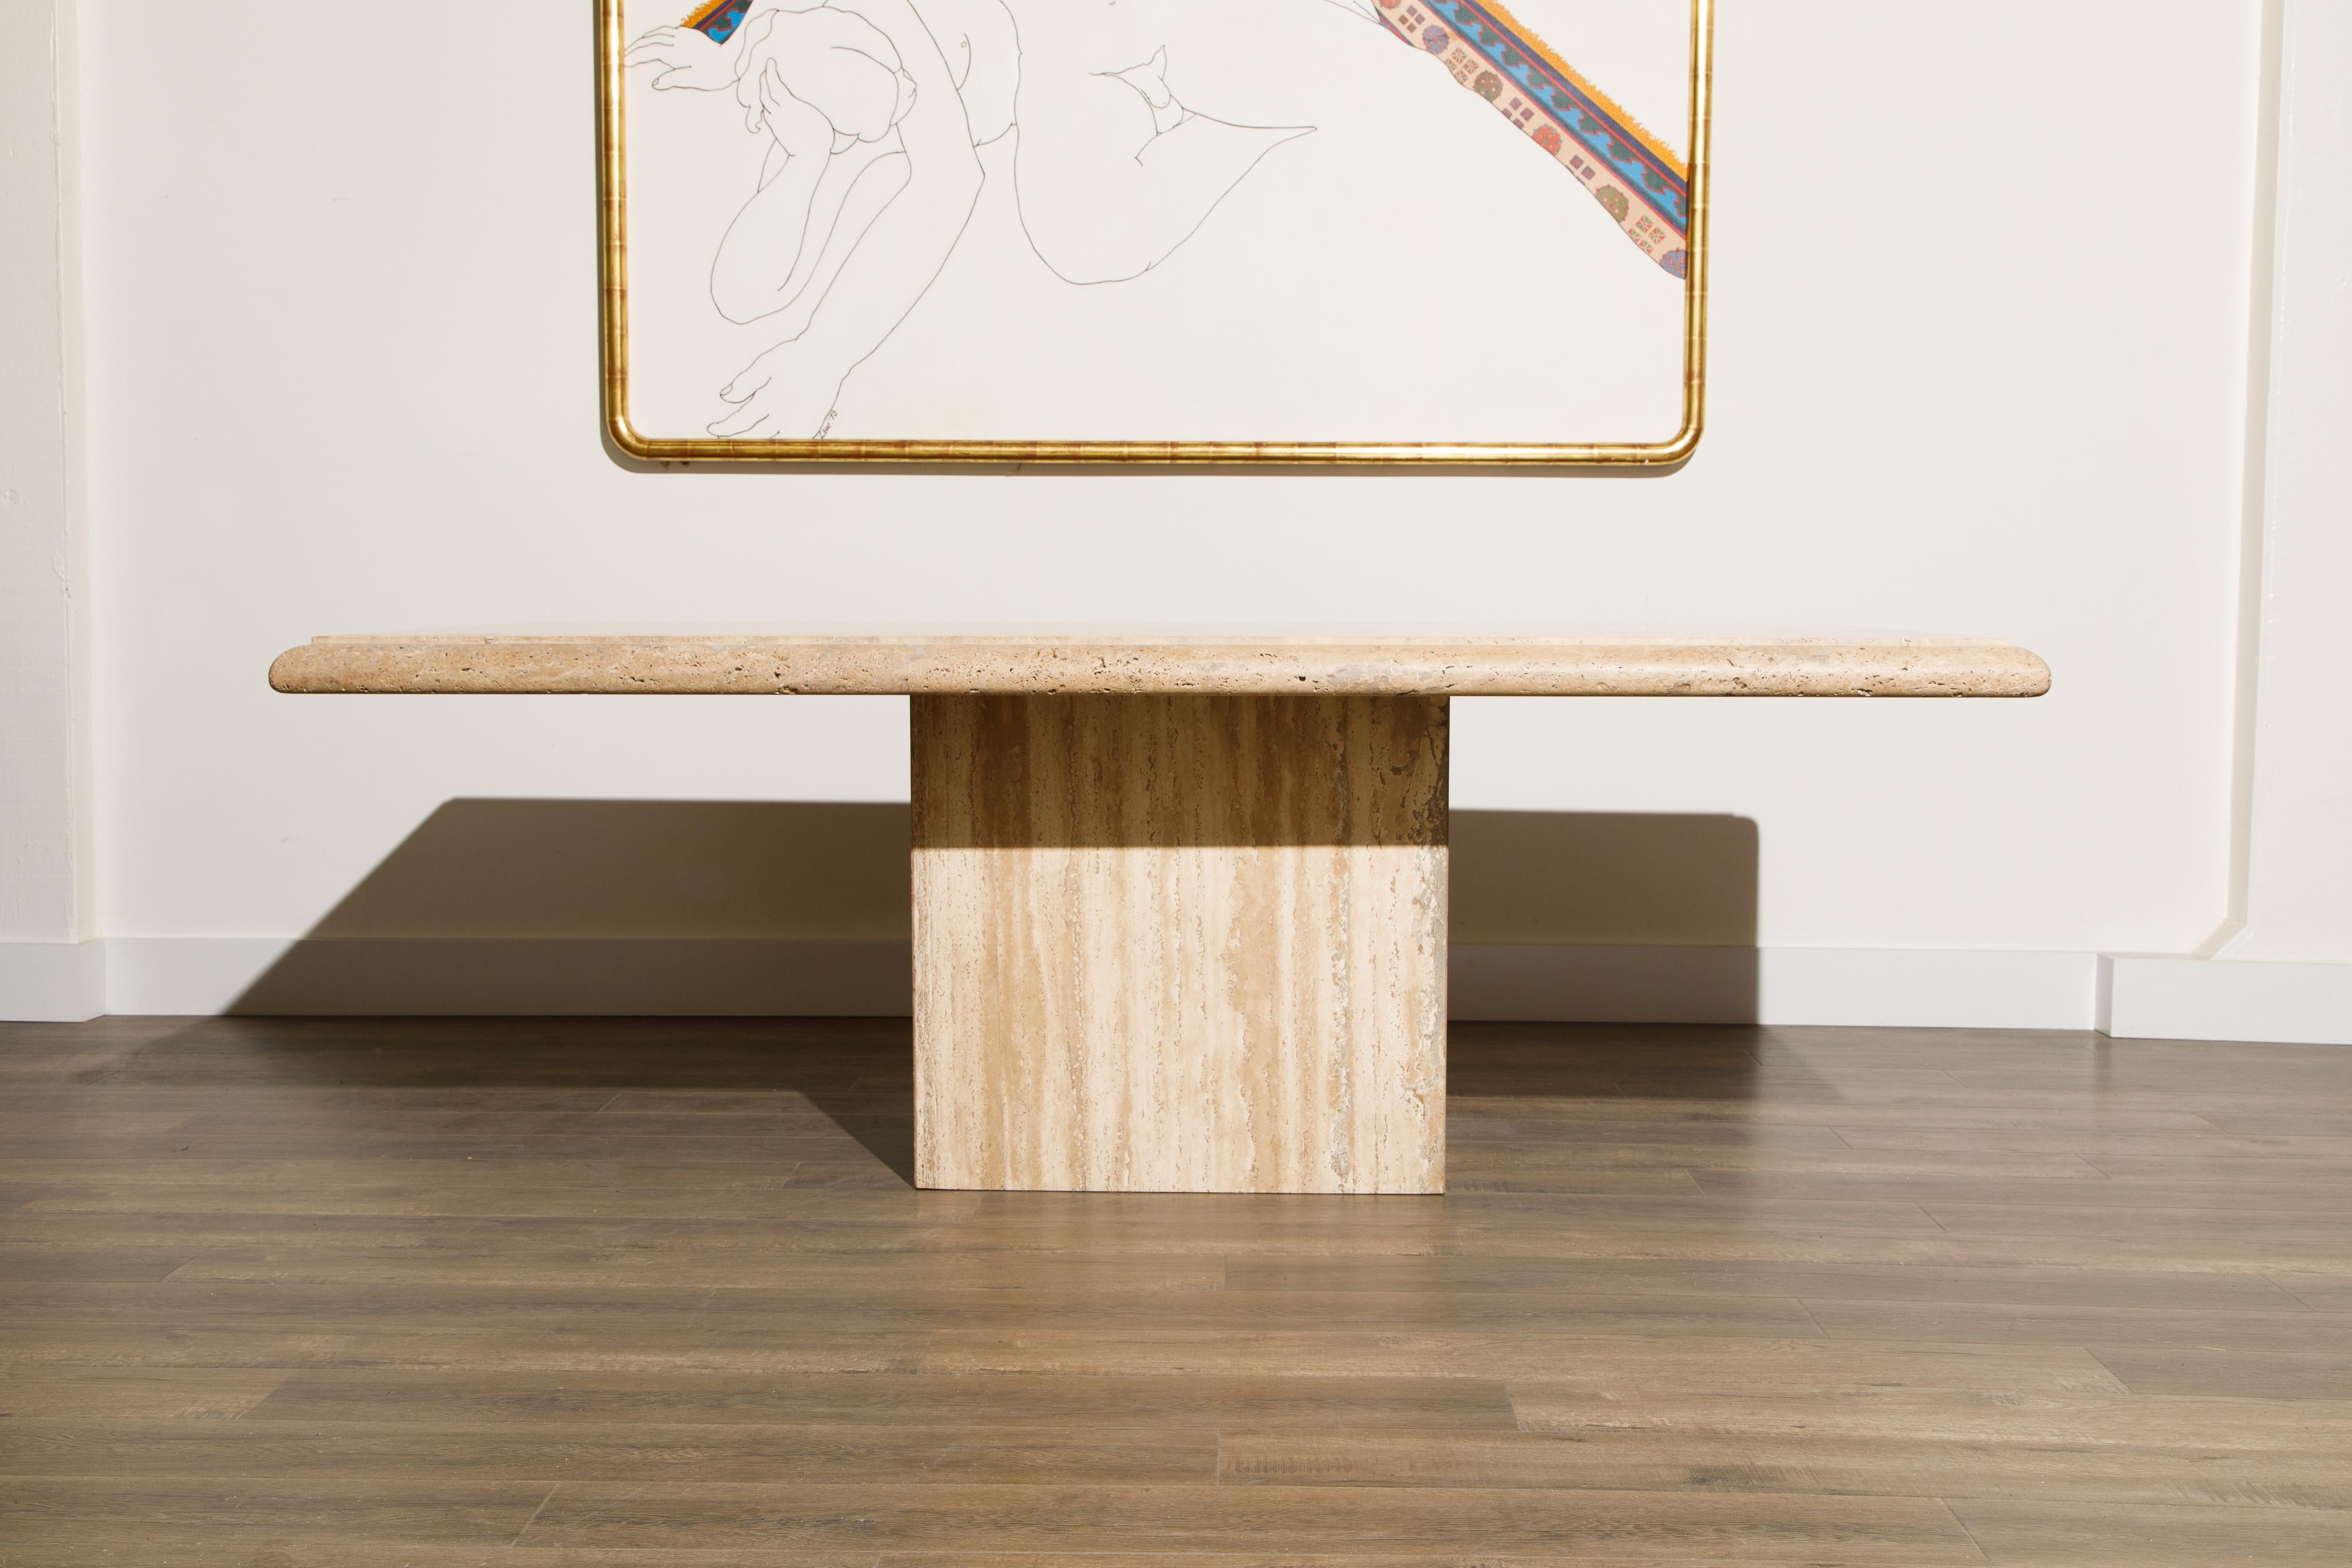 An incredibly stylish Italian travertine dining table by Lima Italy, in the 2000s, featuring a large rectangular top with gorgeous travertine veining and a natural unfilled Travertine edge which wraps around all sides, sitting on top of a rectangle